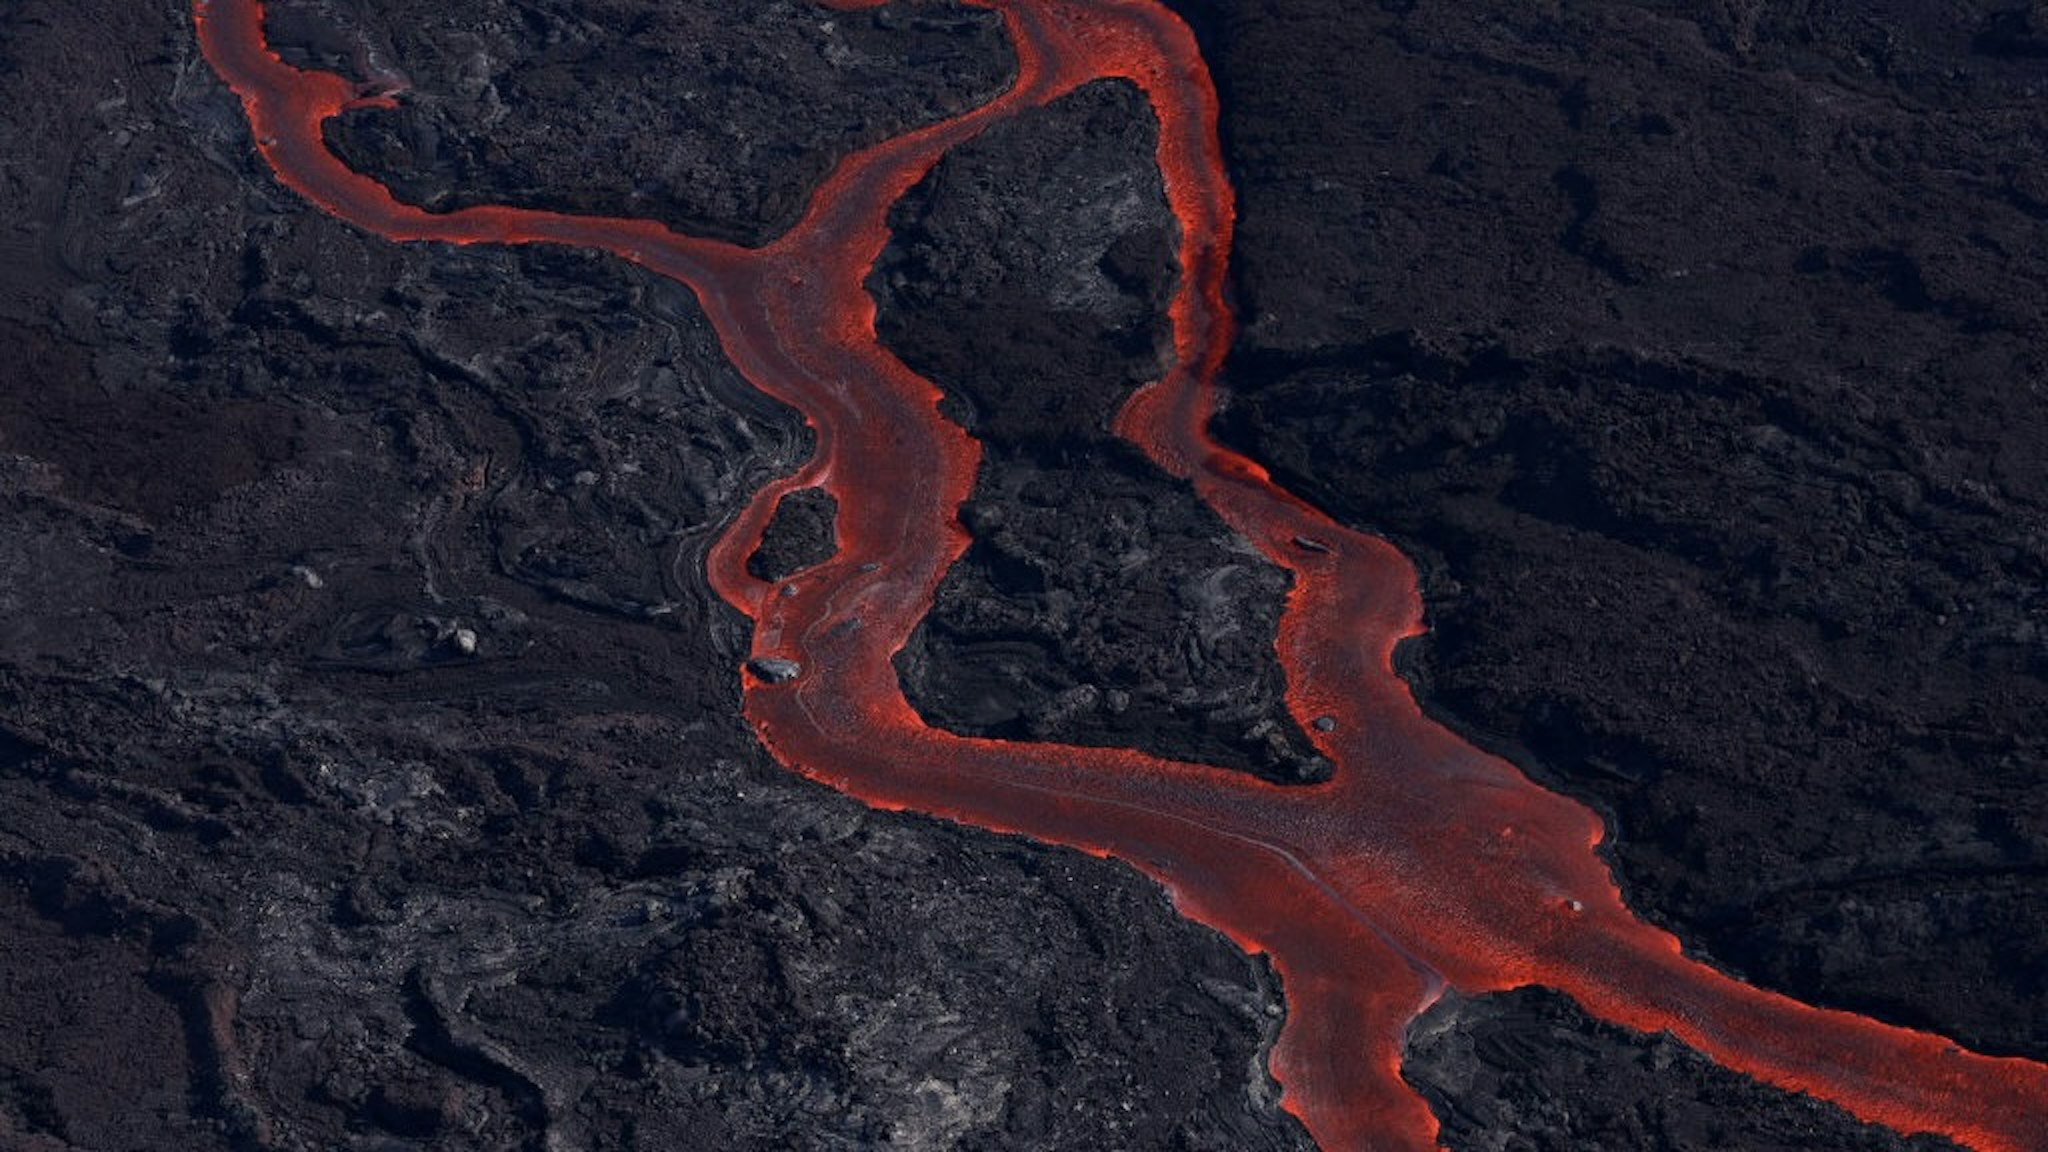 Mauna Loa Volcano Erupts On Big Island Of Hawaii HILO, HAWAII - DECEMBER 05: In an aerial view, lava flows from a fissure of Mauna Loa Volcano as it erupts on December 05, 2022 in Hilo, Hawaii. For the first time in nearly 40 years, the Mauna Loa volcano, the largest active volcano in the world, has erupted. (Photo by Justin Sullivan/Getty Images) Justin Sullivan / Staff